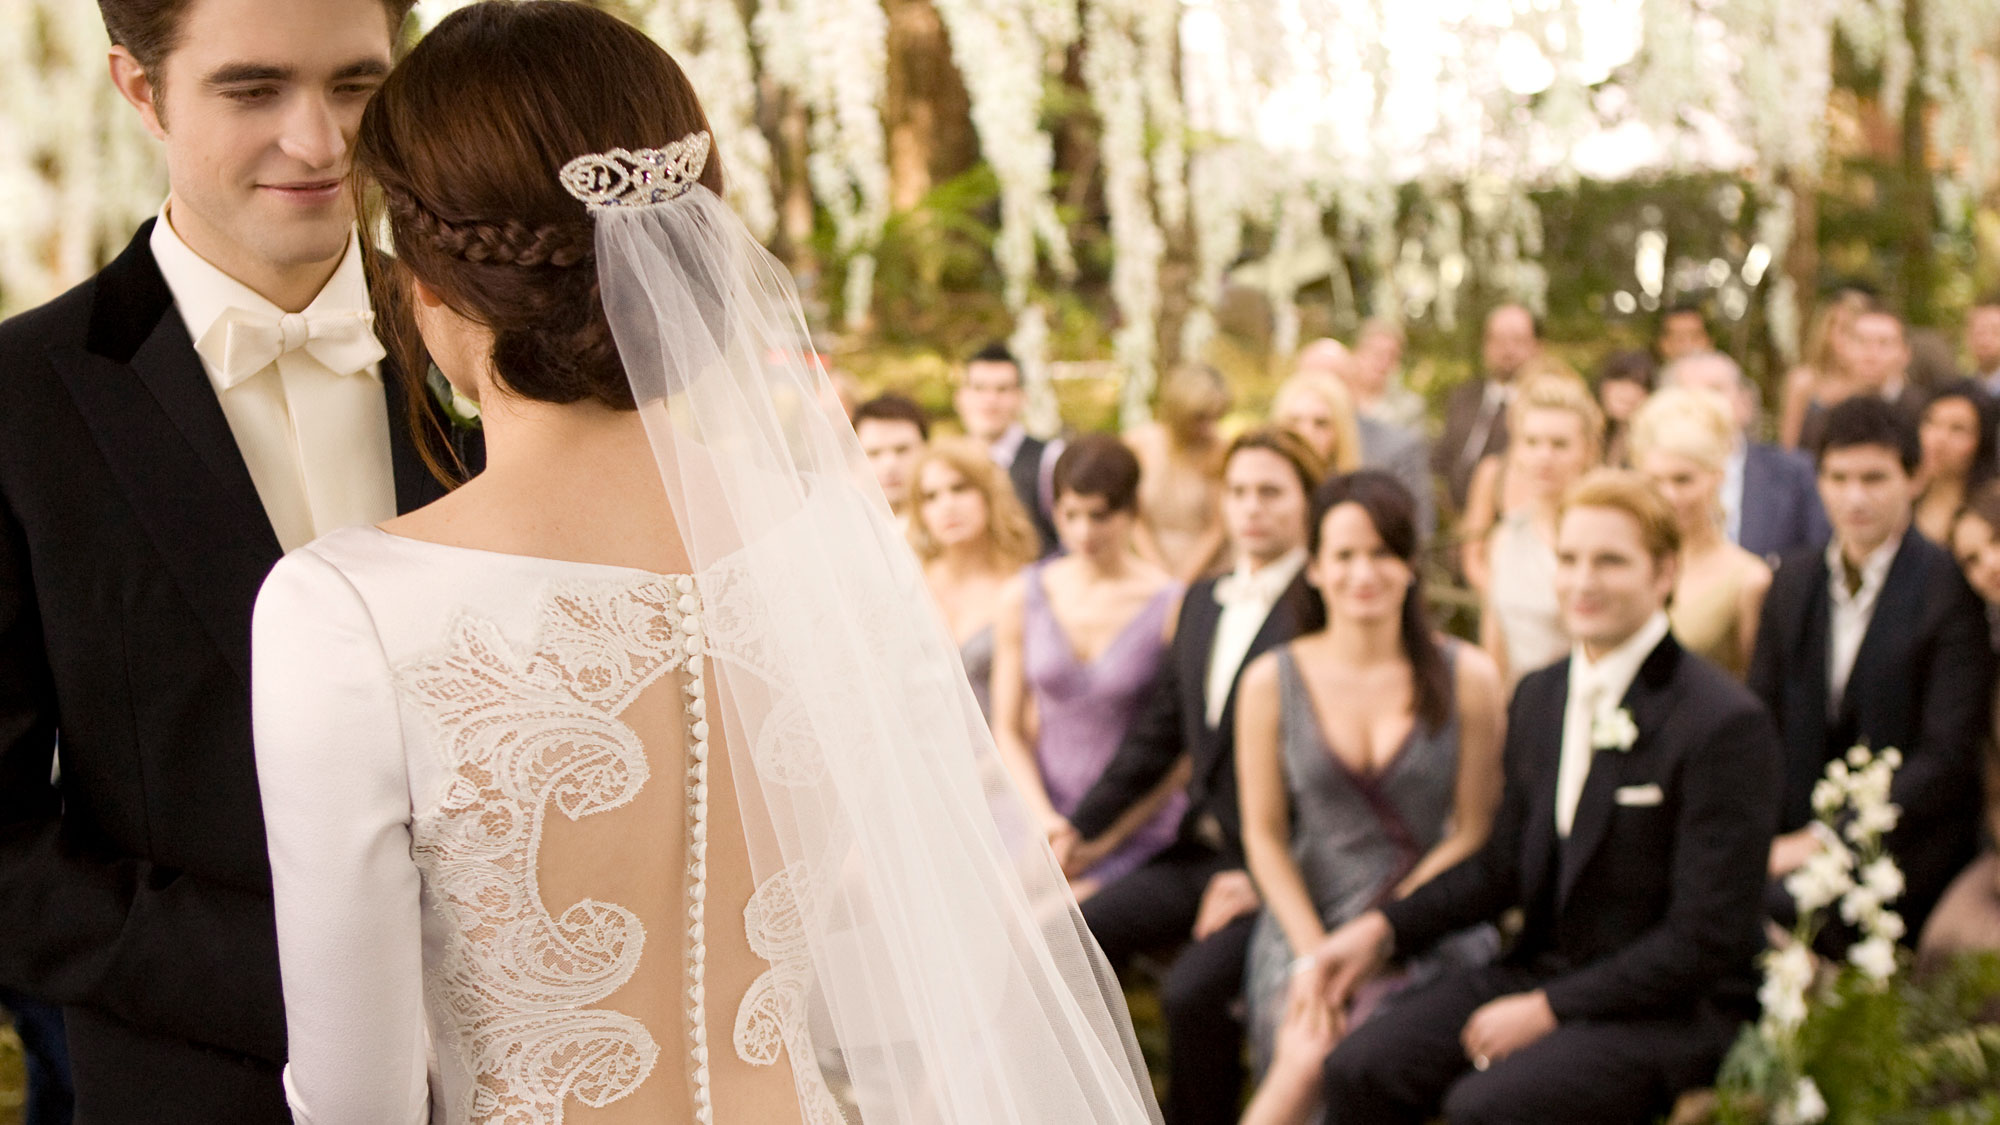 Bella Swan's Twilight Wedding Dress Is Up For Auction | Marie Claire UK